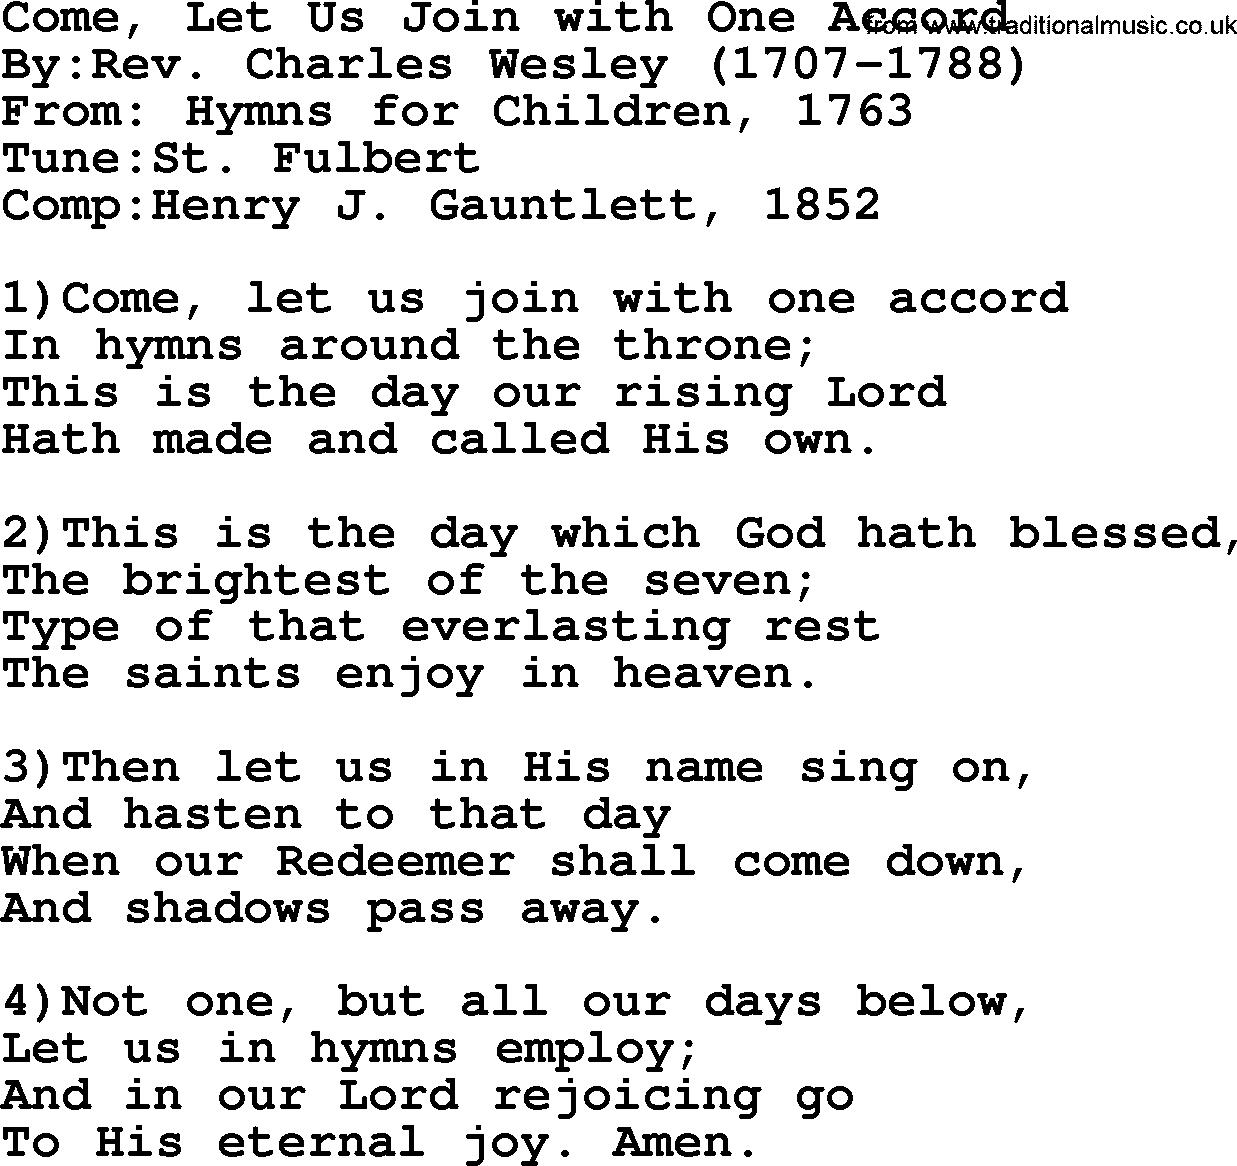 Methodist Hymn: Come, Let Us Join With One Accord, lyrics